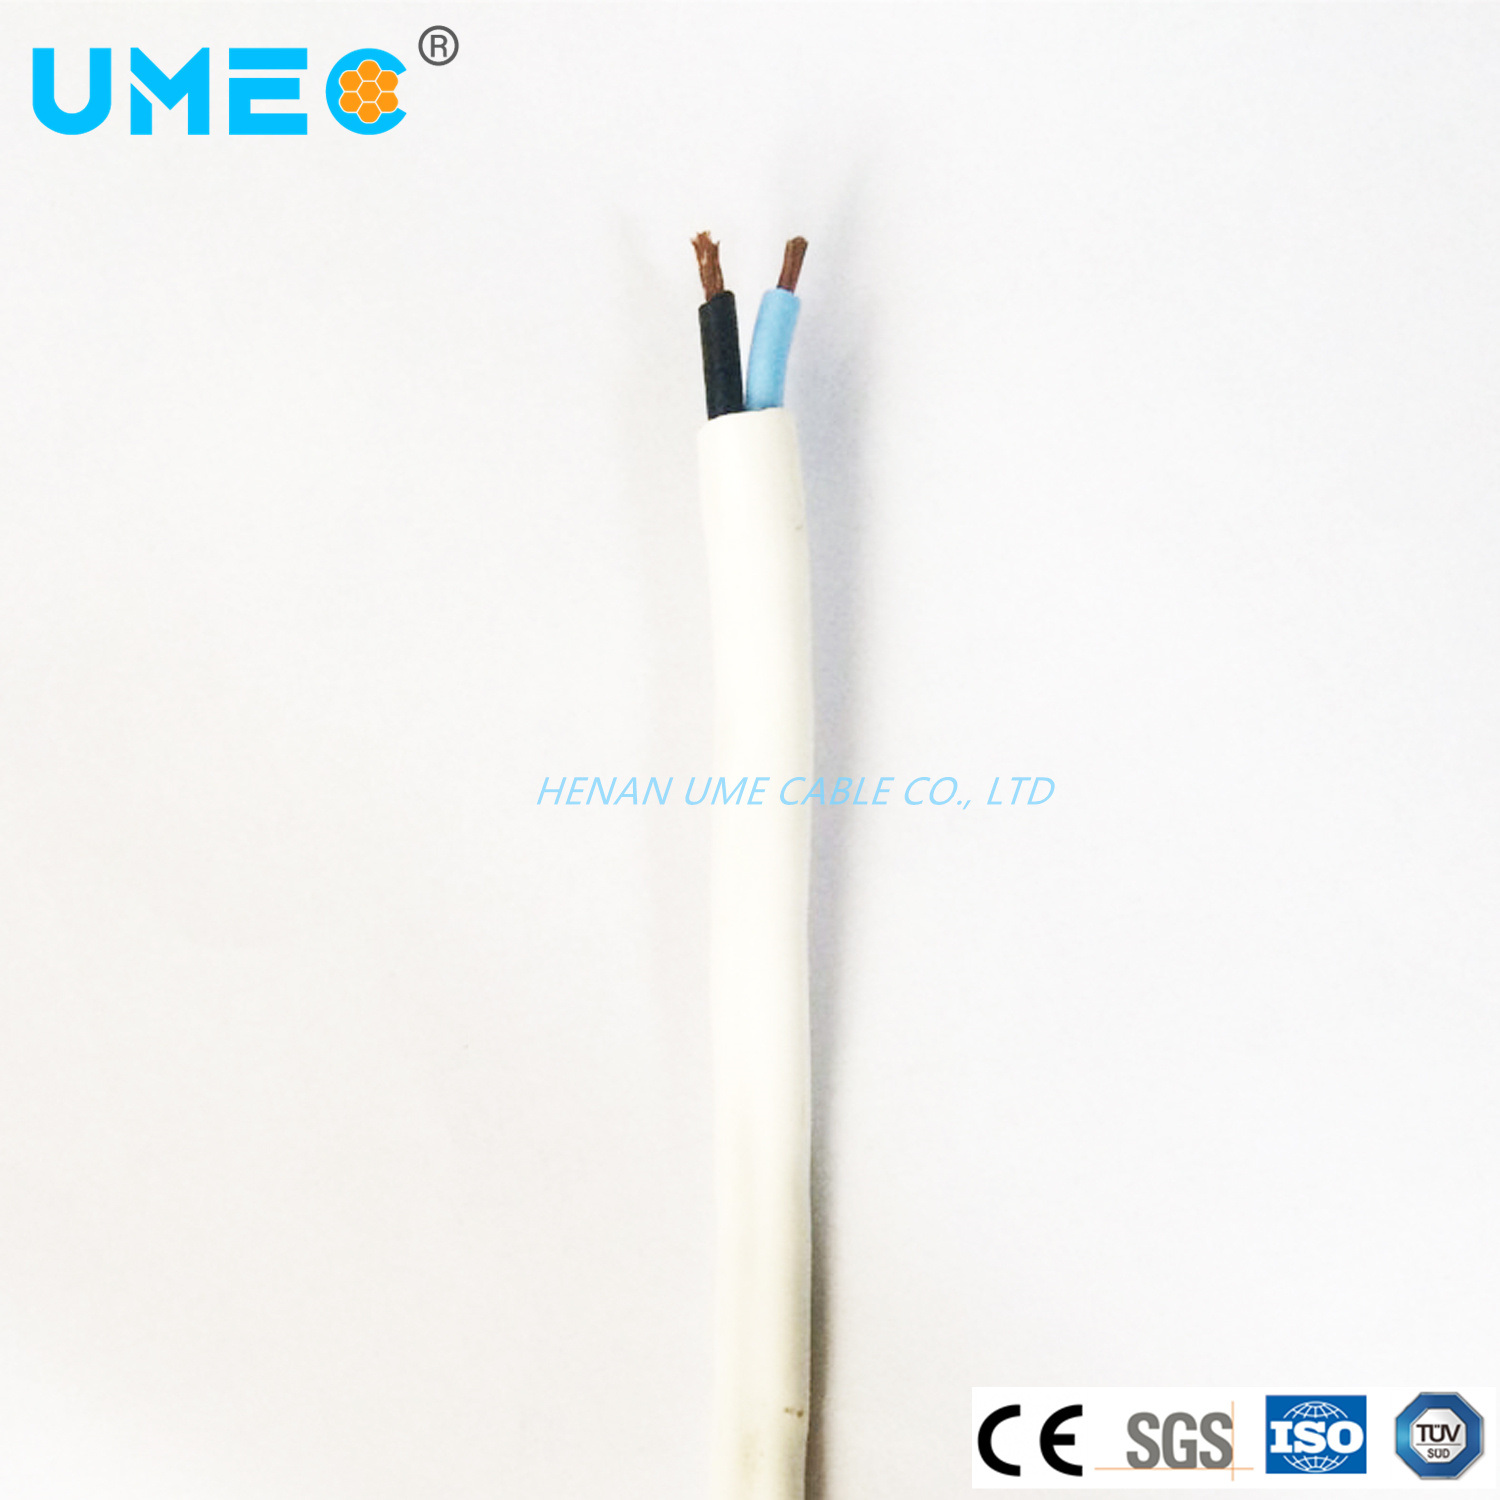 Wholesale Electrical Cord 300V H03vvh2-F 2X0.5mm2 PVC Coated Power Cable IEC Flat Cable